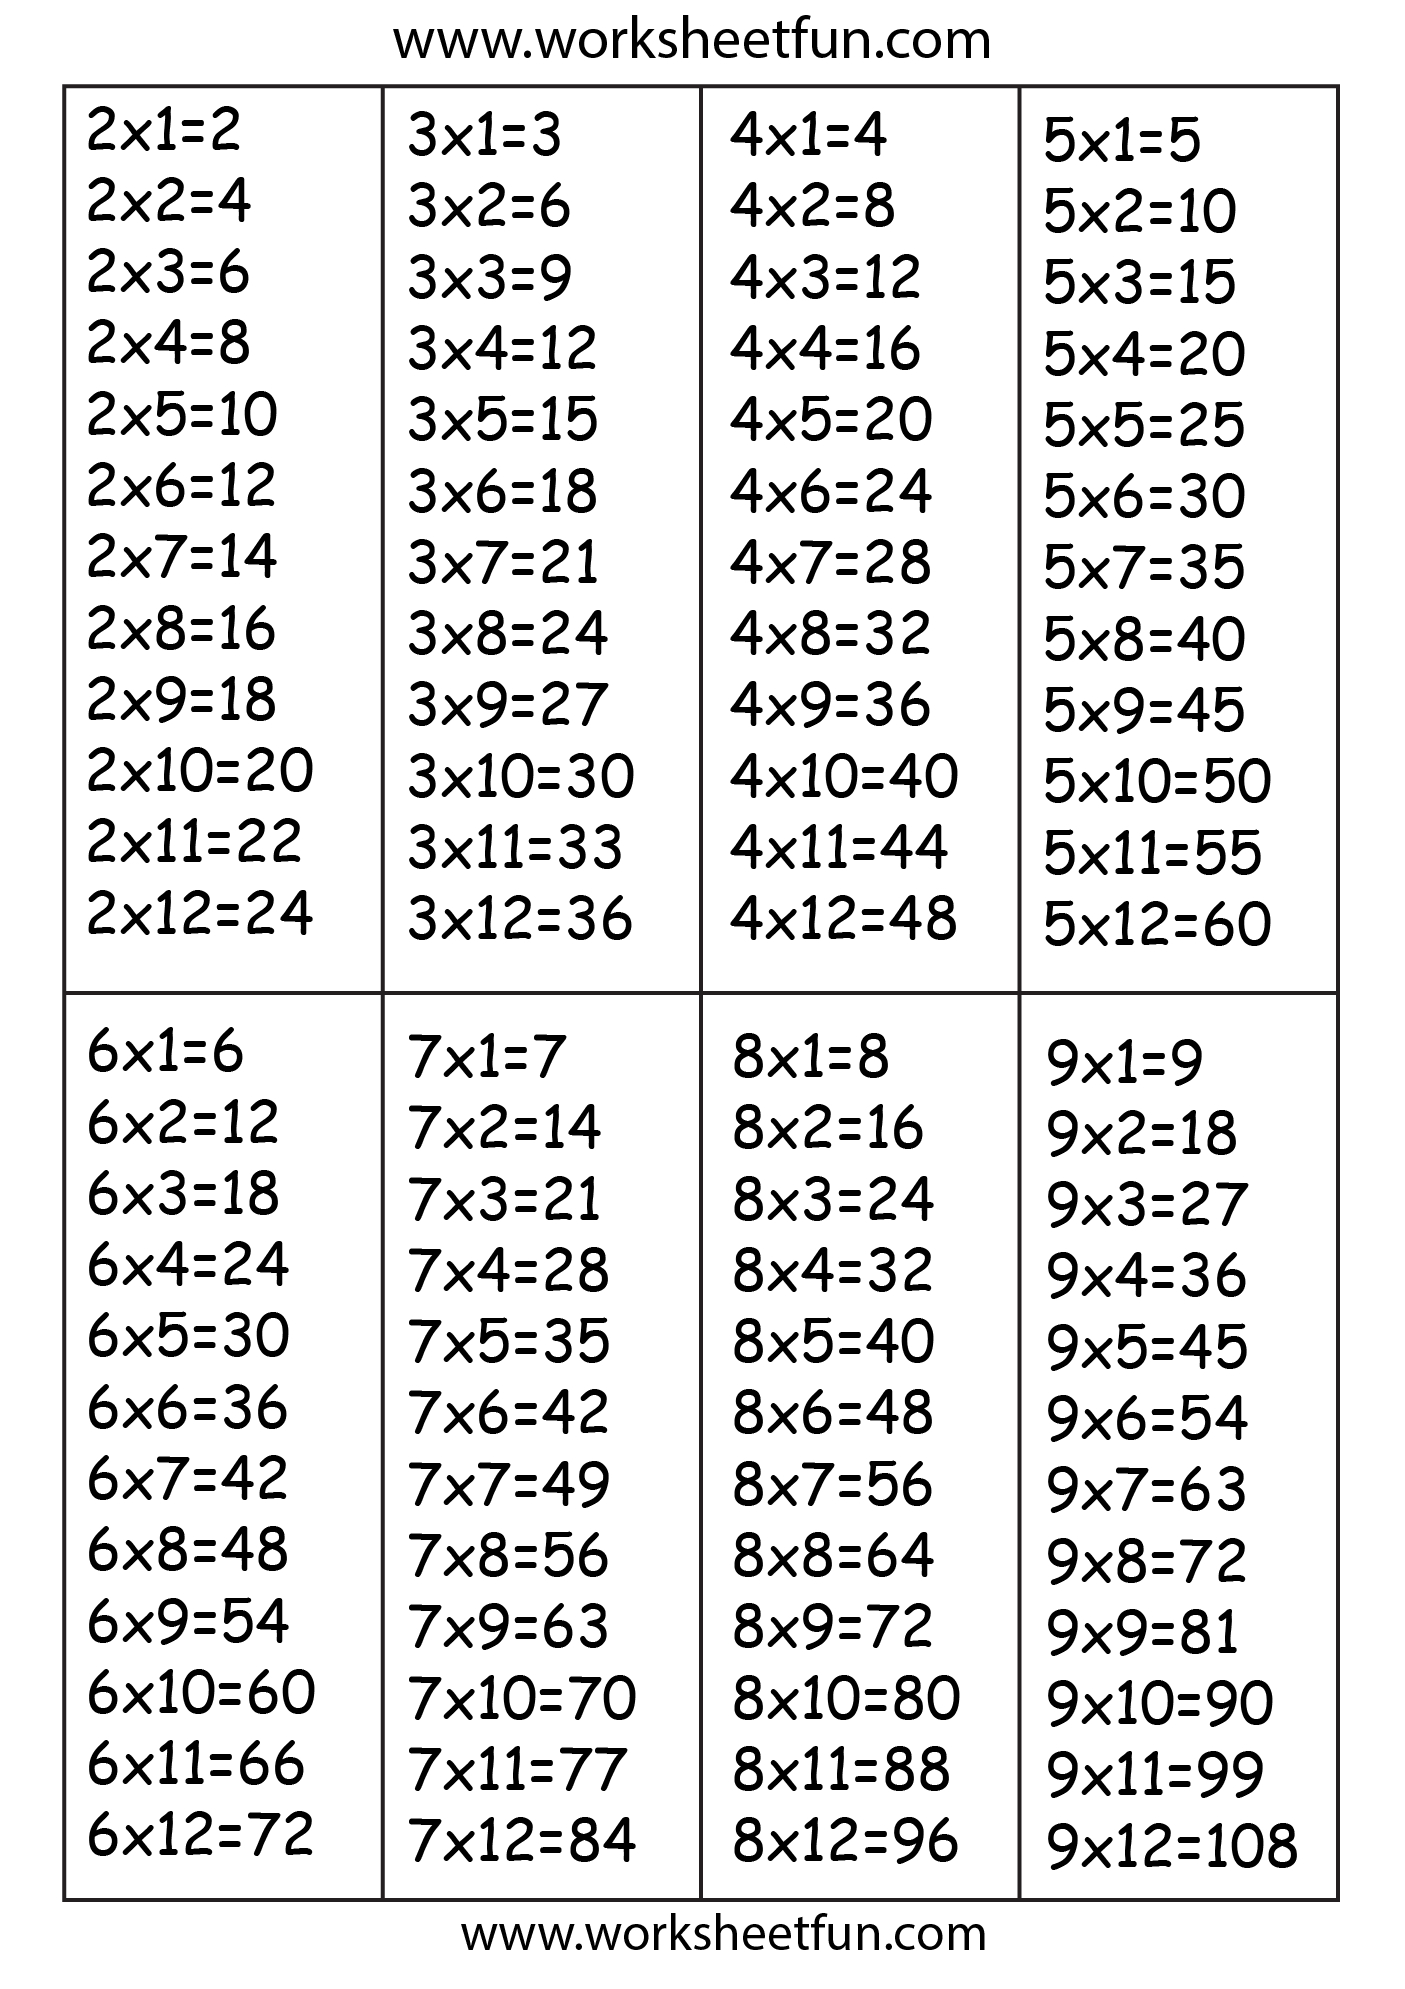 Times Tables / Free Printable Worksheets – Worksheetfun | Times Tables Worksheets Printable